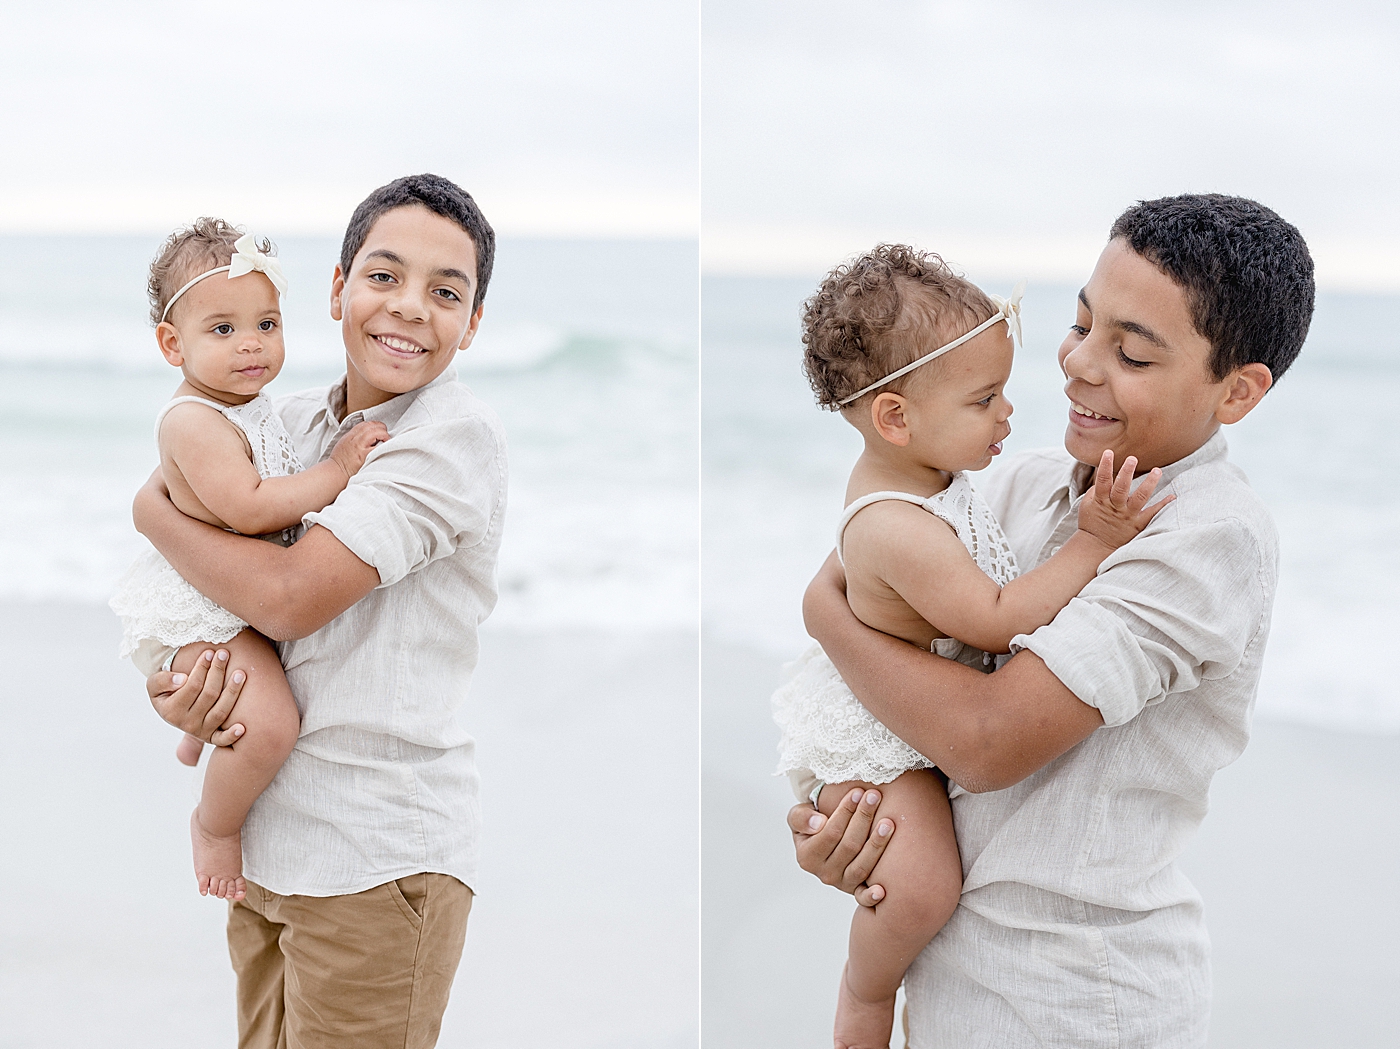 Sibling photos between big brother and baby sister. Photo by Brittany Elise Photography.